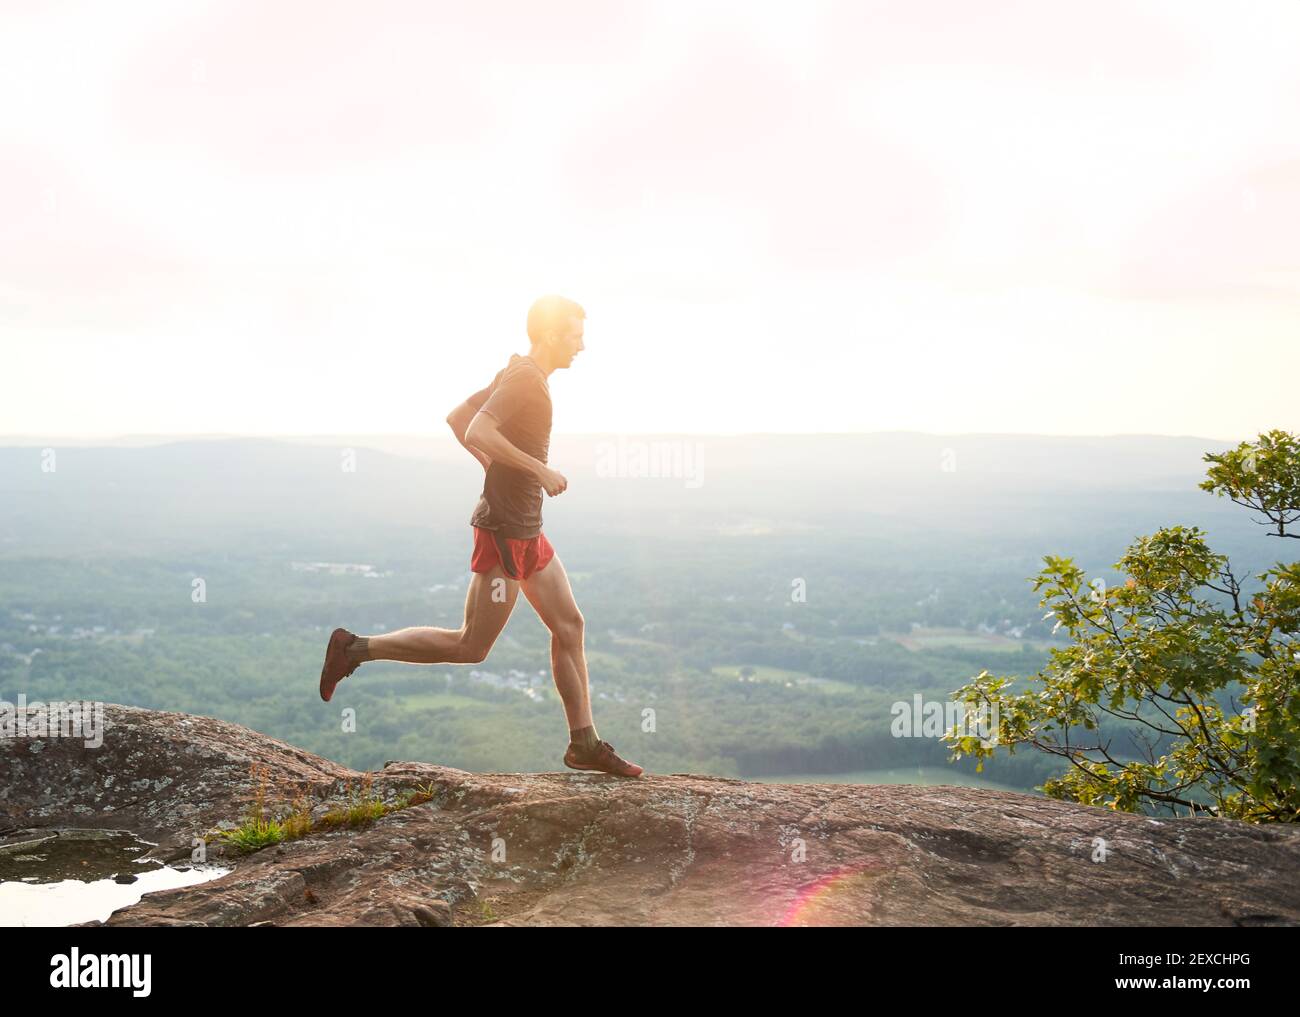 Adult male trail runner on a mountain ridge at sunset Stock Photo